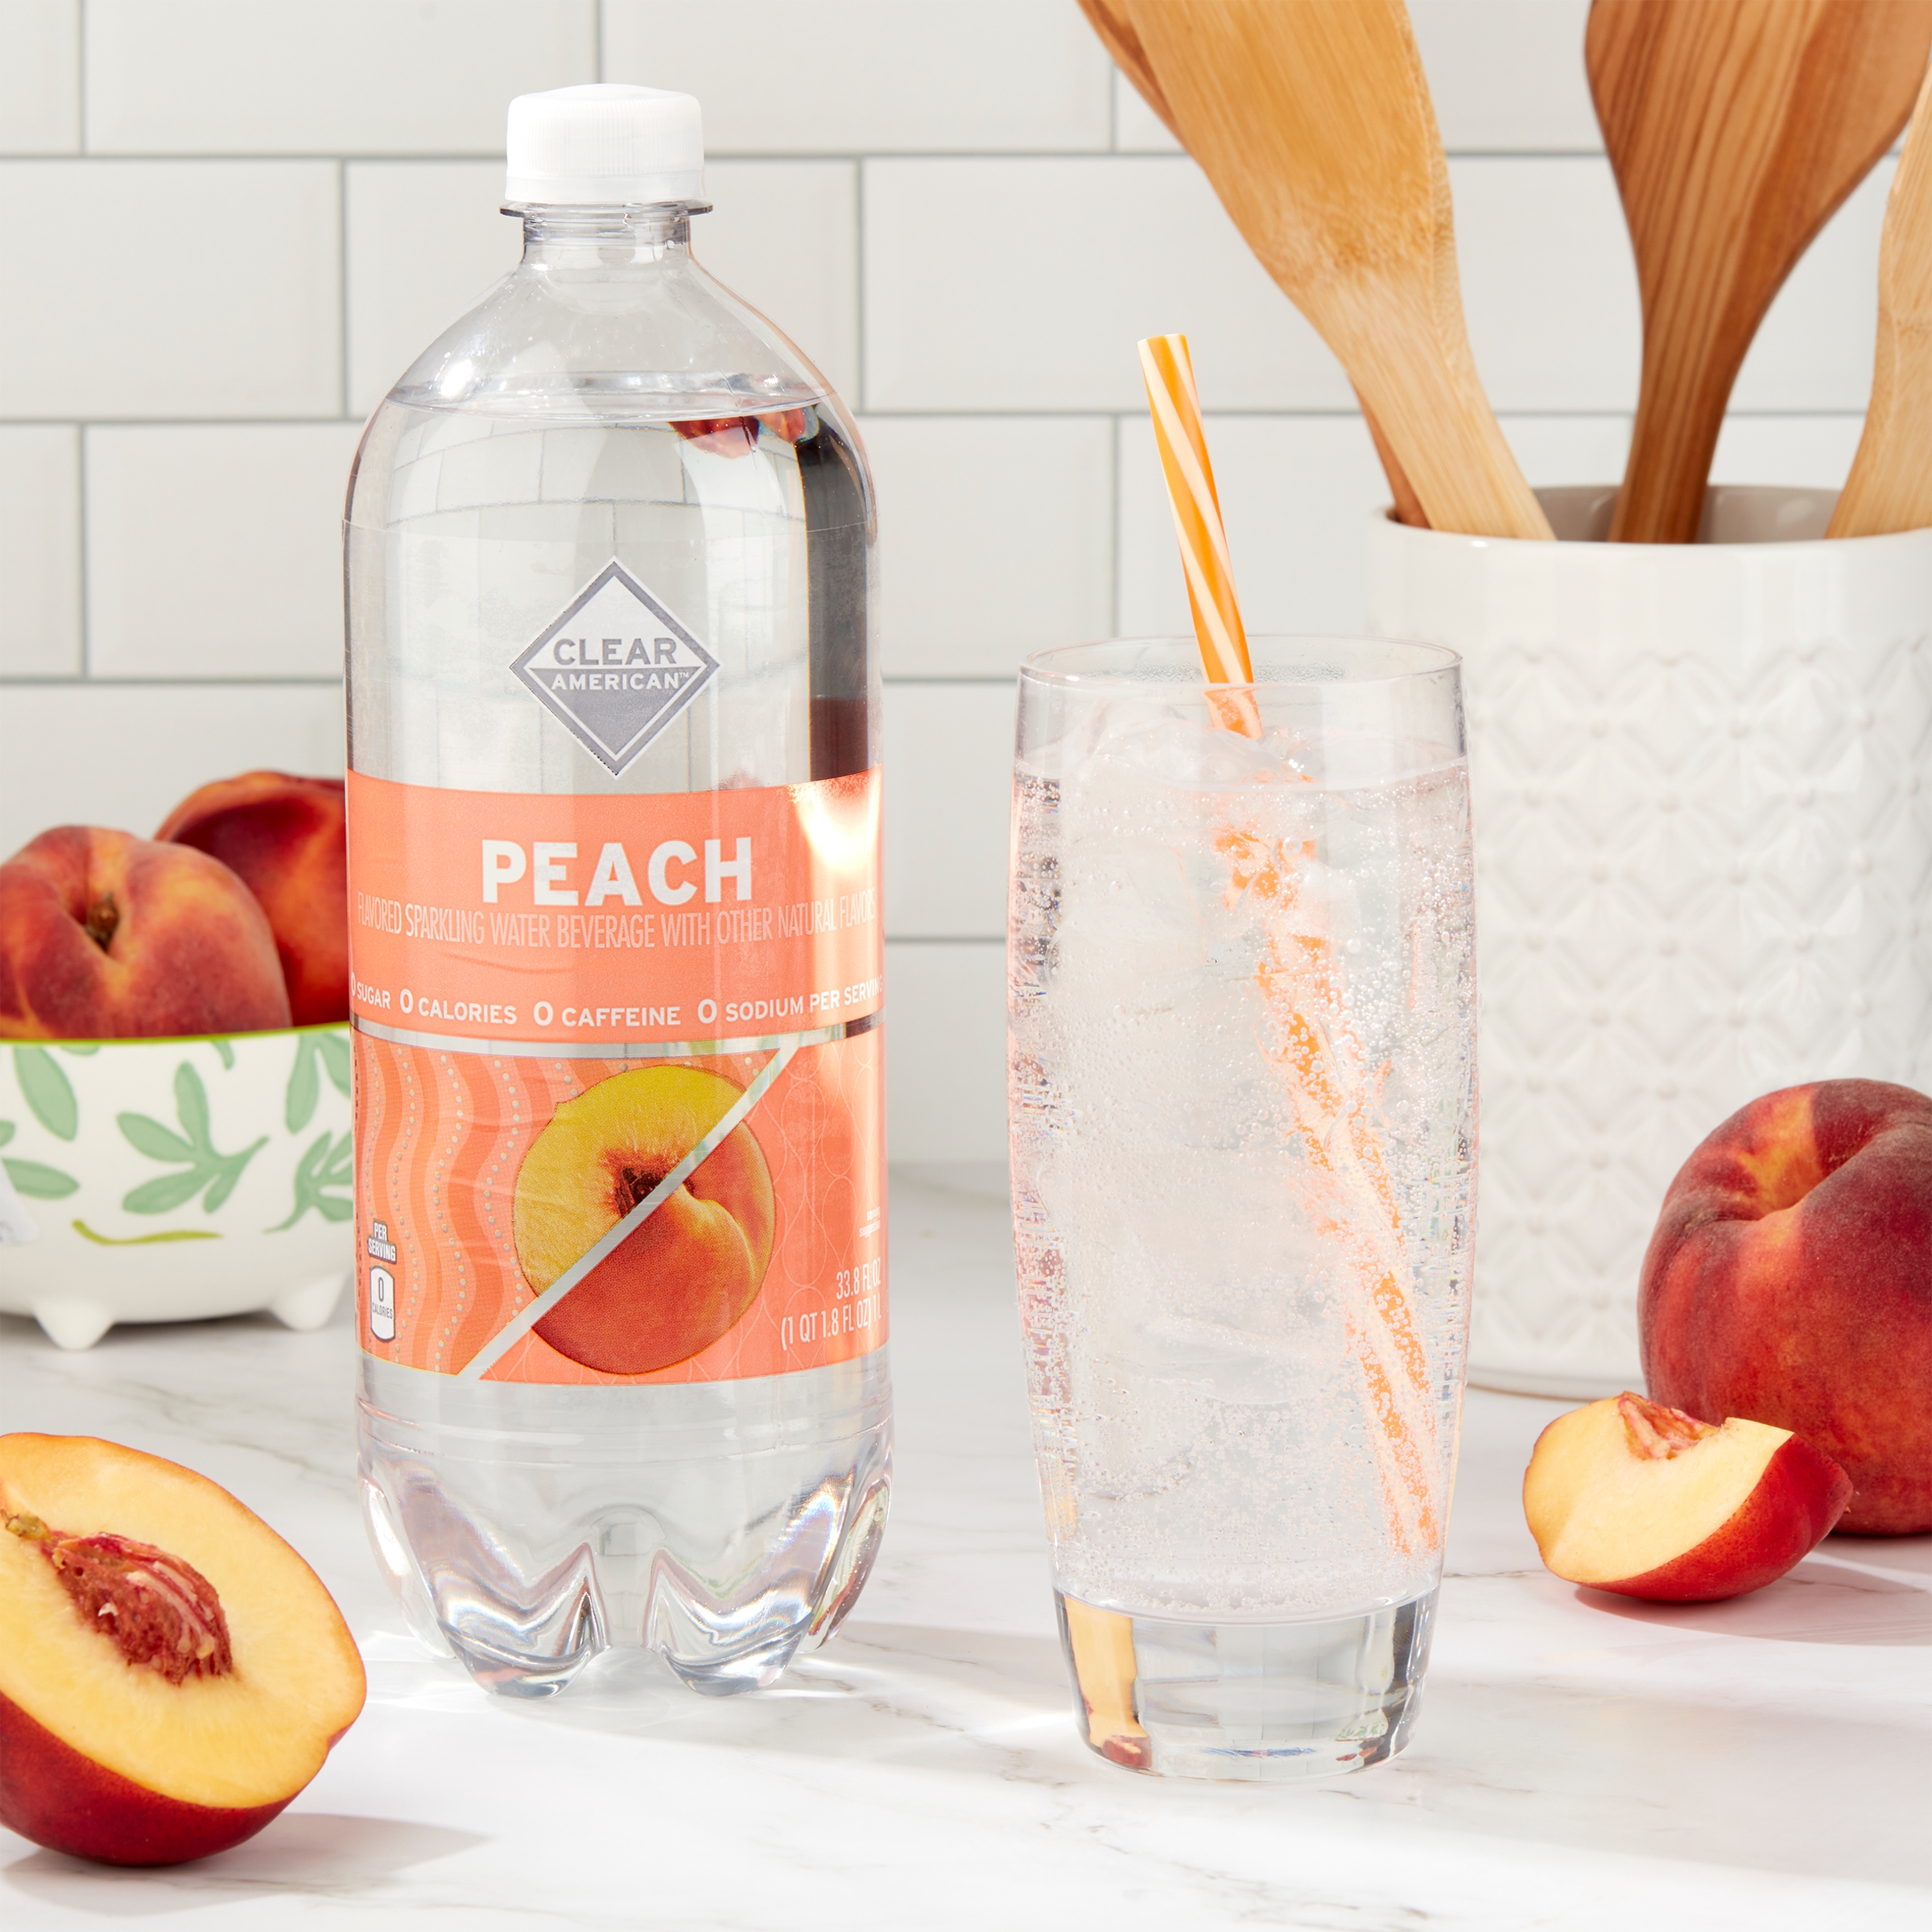 Clear American Peach Sparkling Water, 33.8 fl oz - image 2 of 7